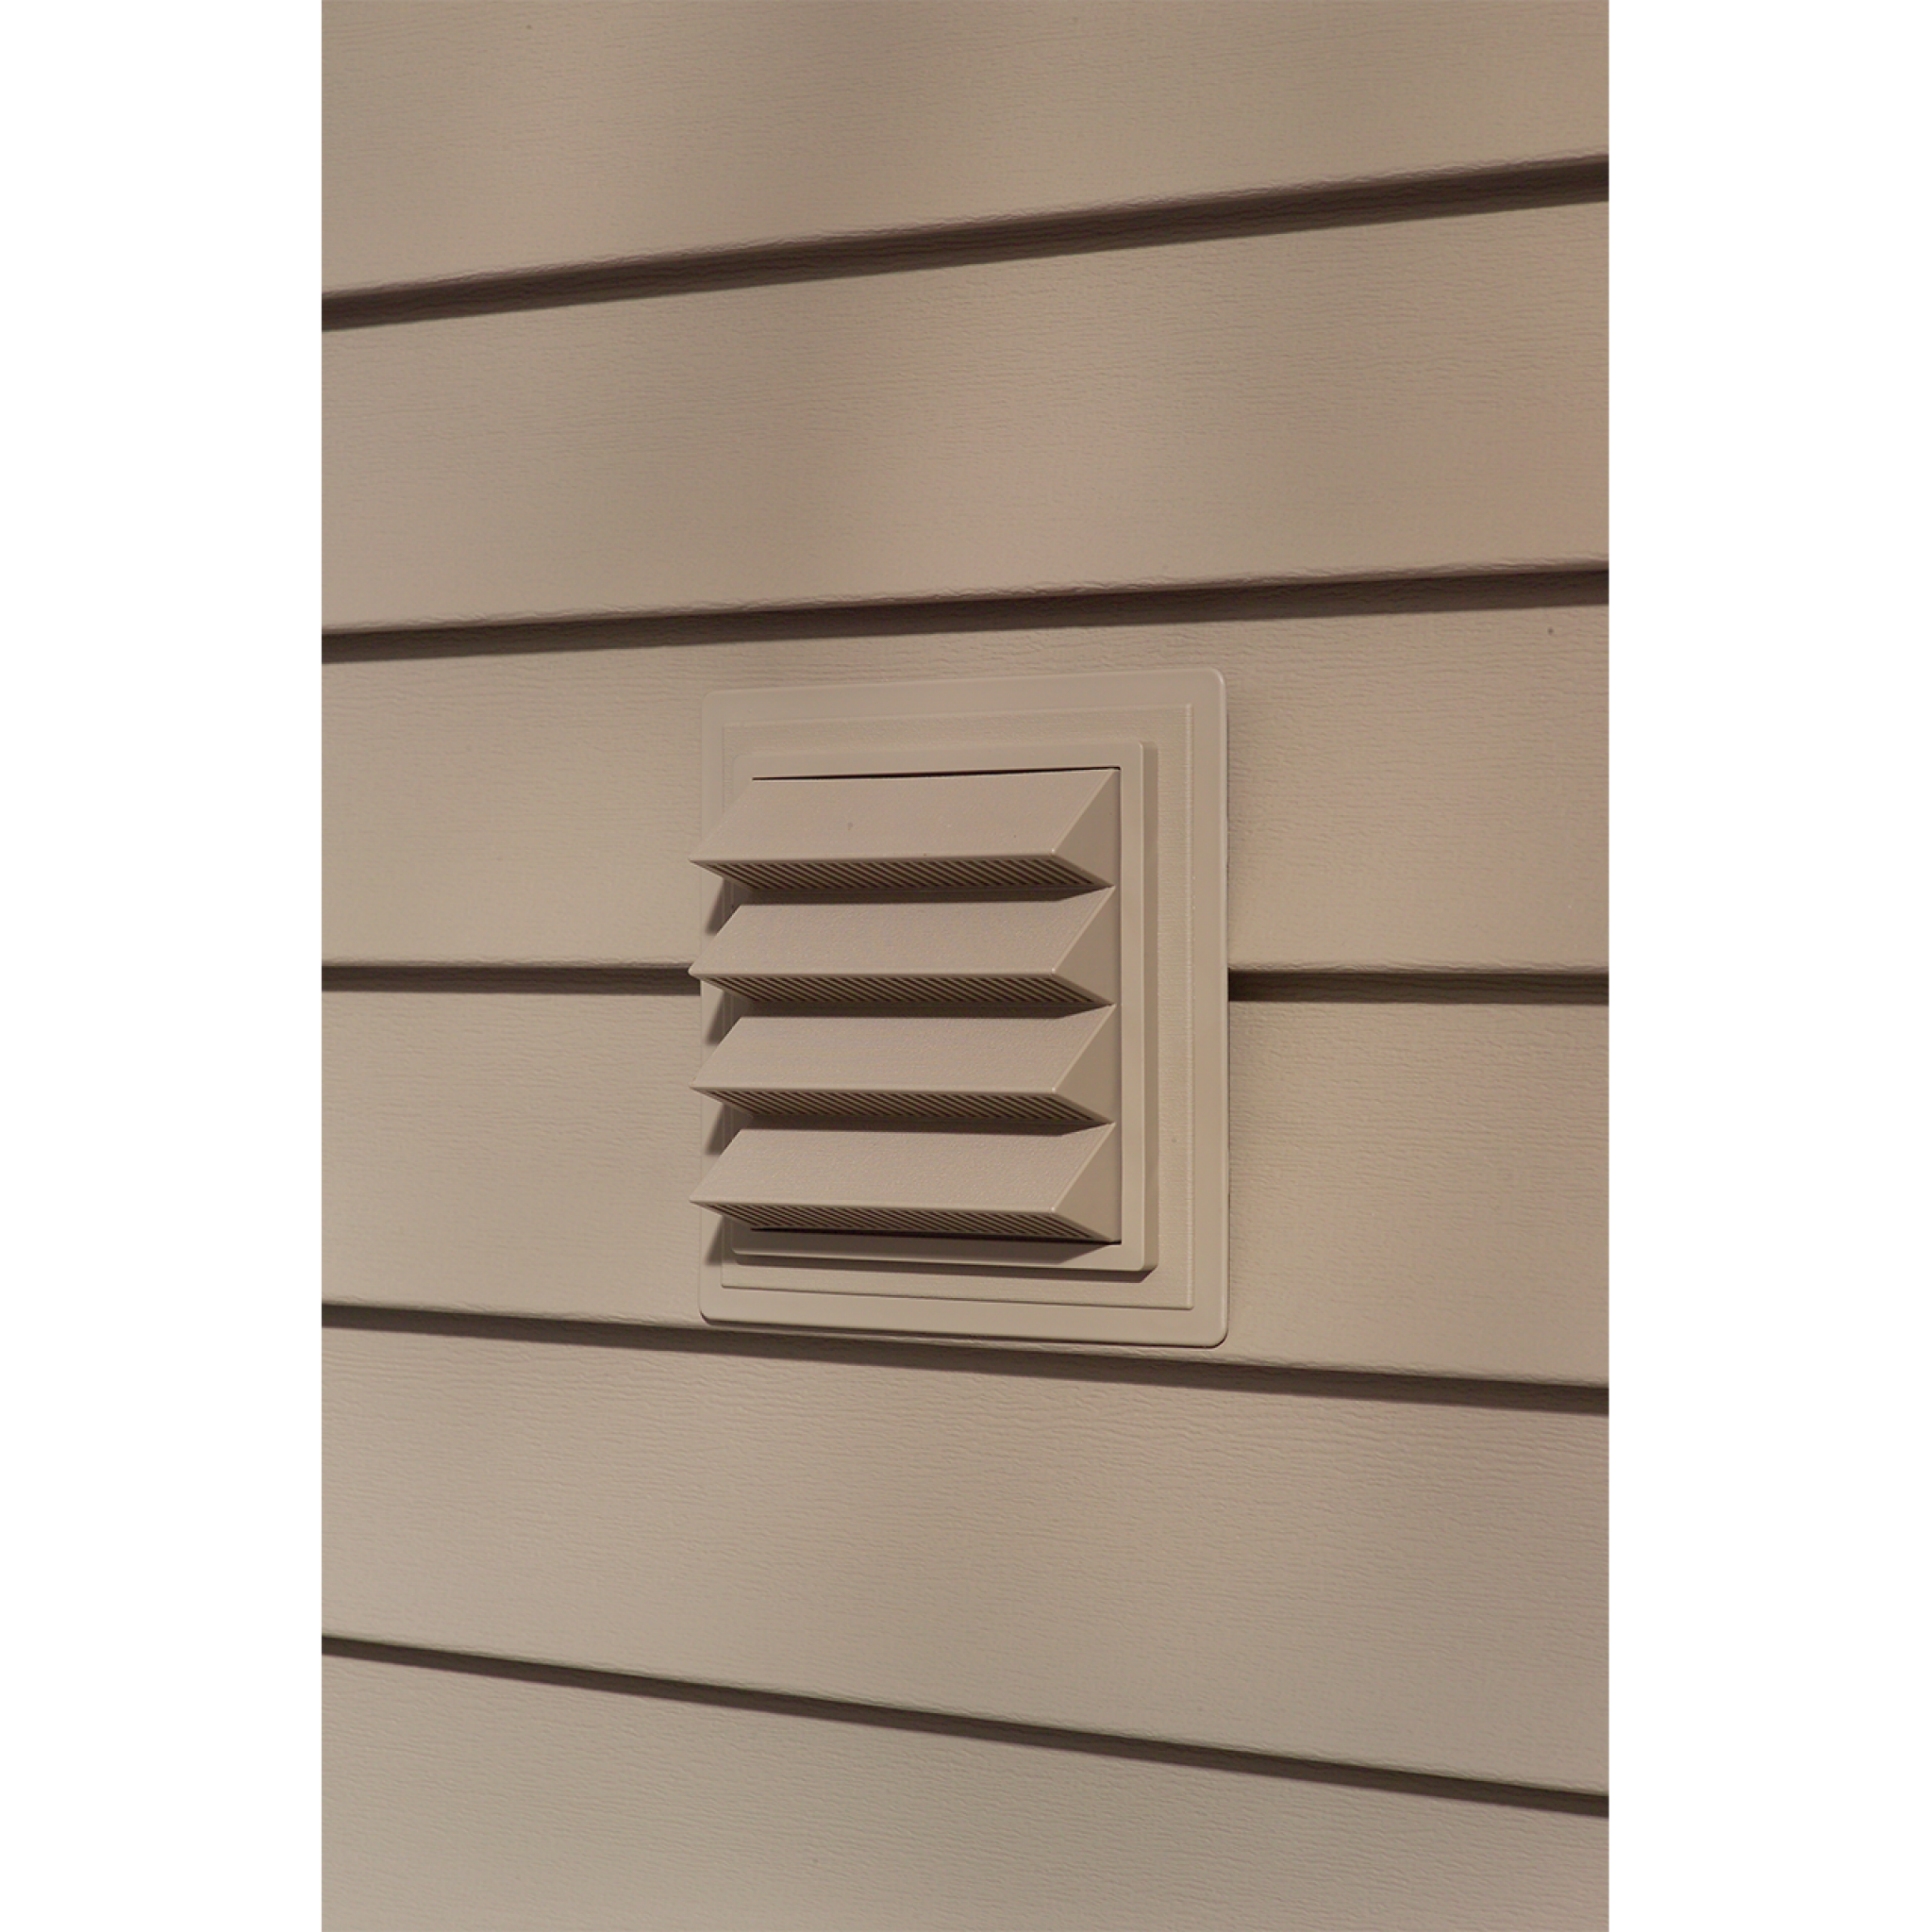 Louvered Intake Vent